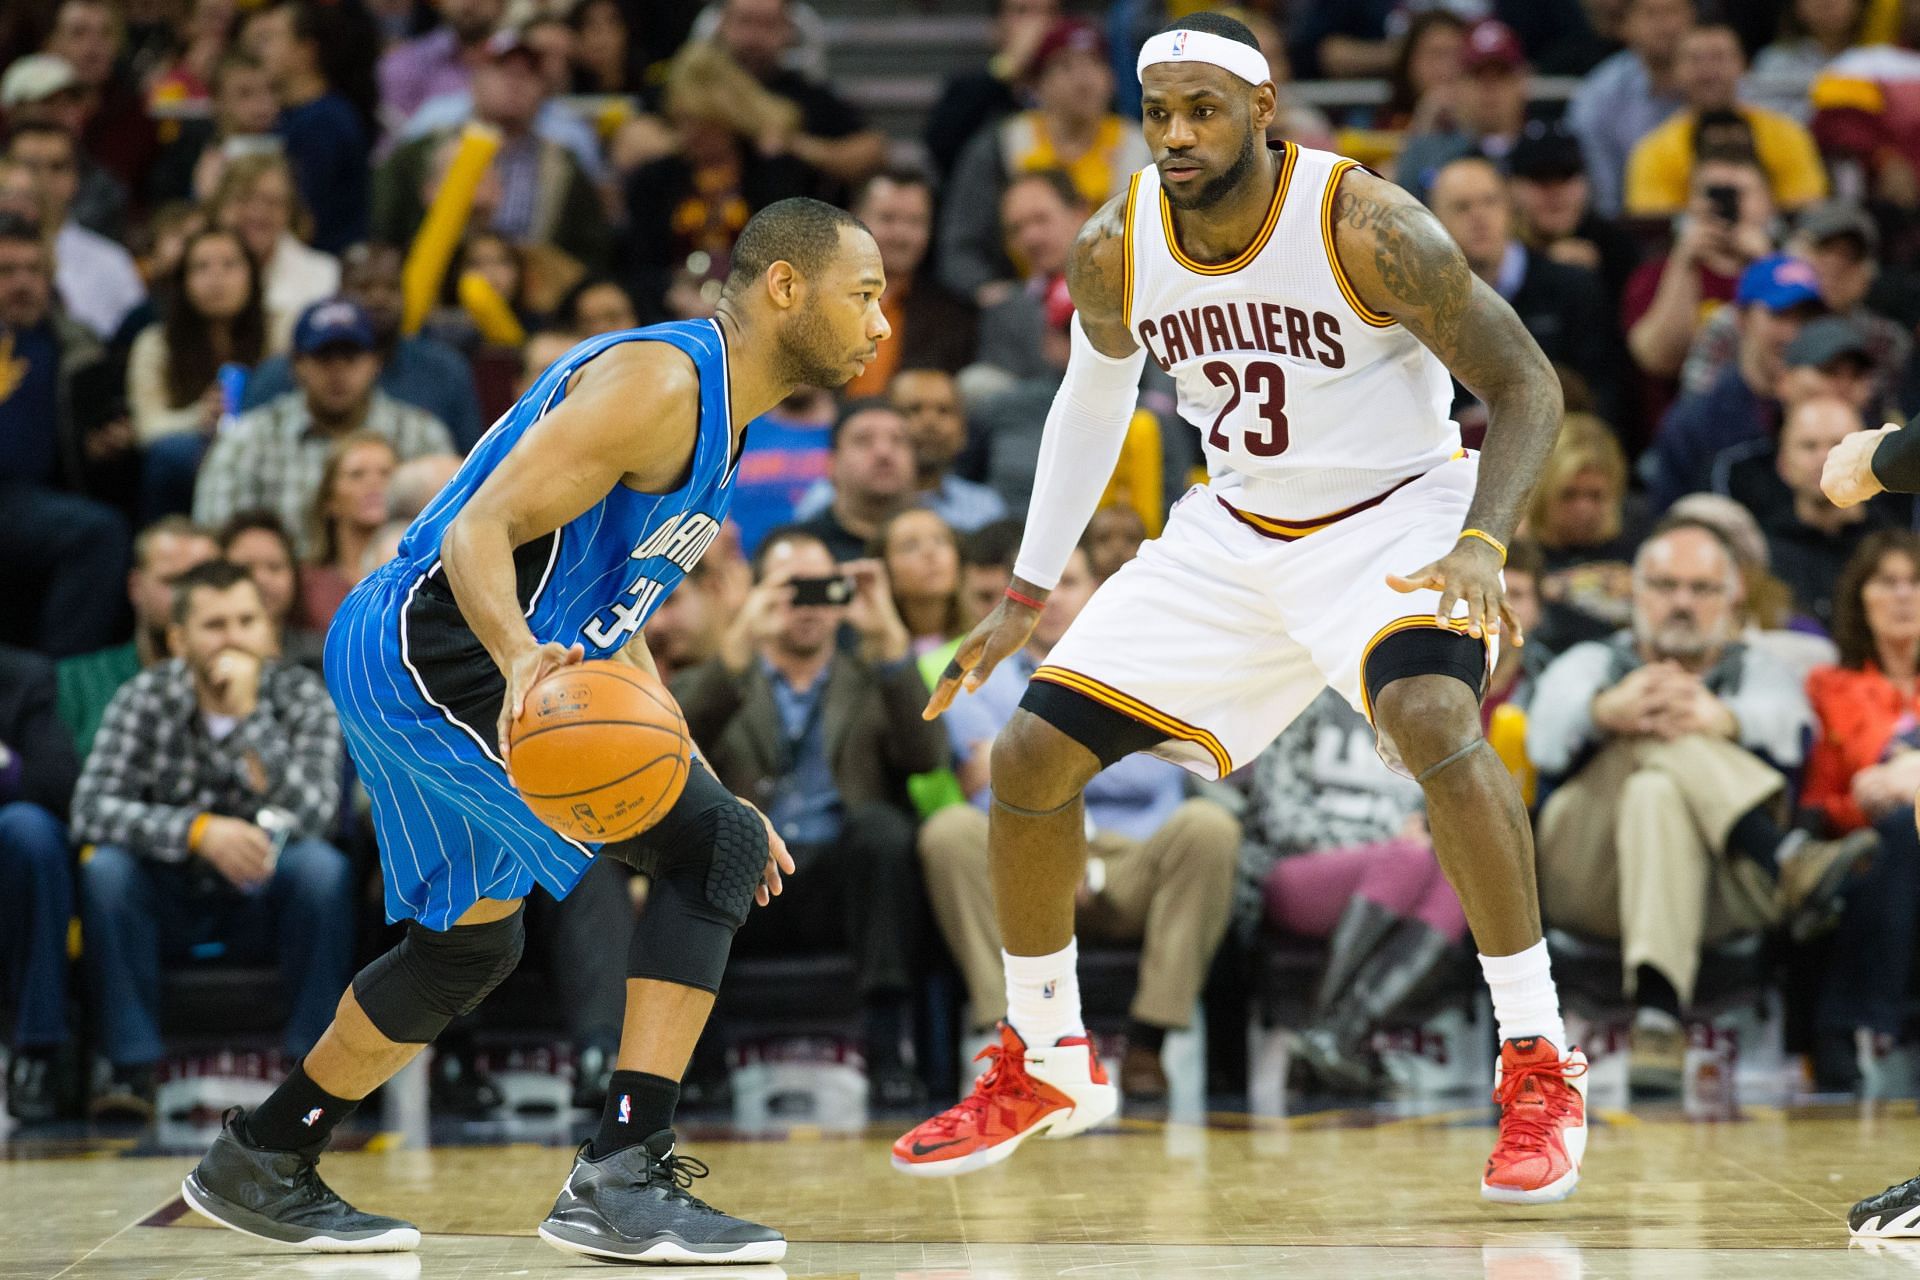 LeBron James defends Willie Green of the Orlando Magic.